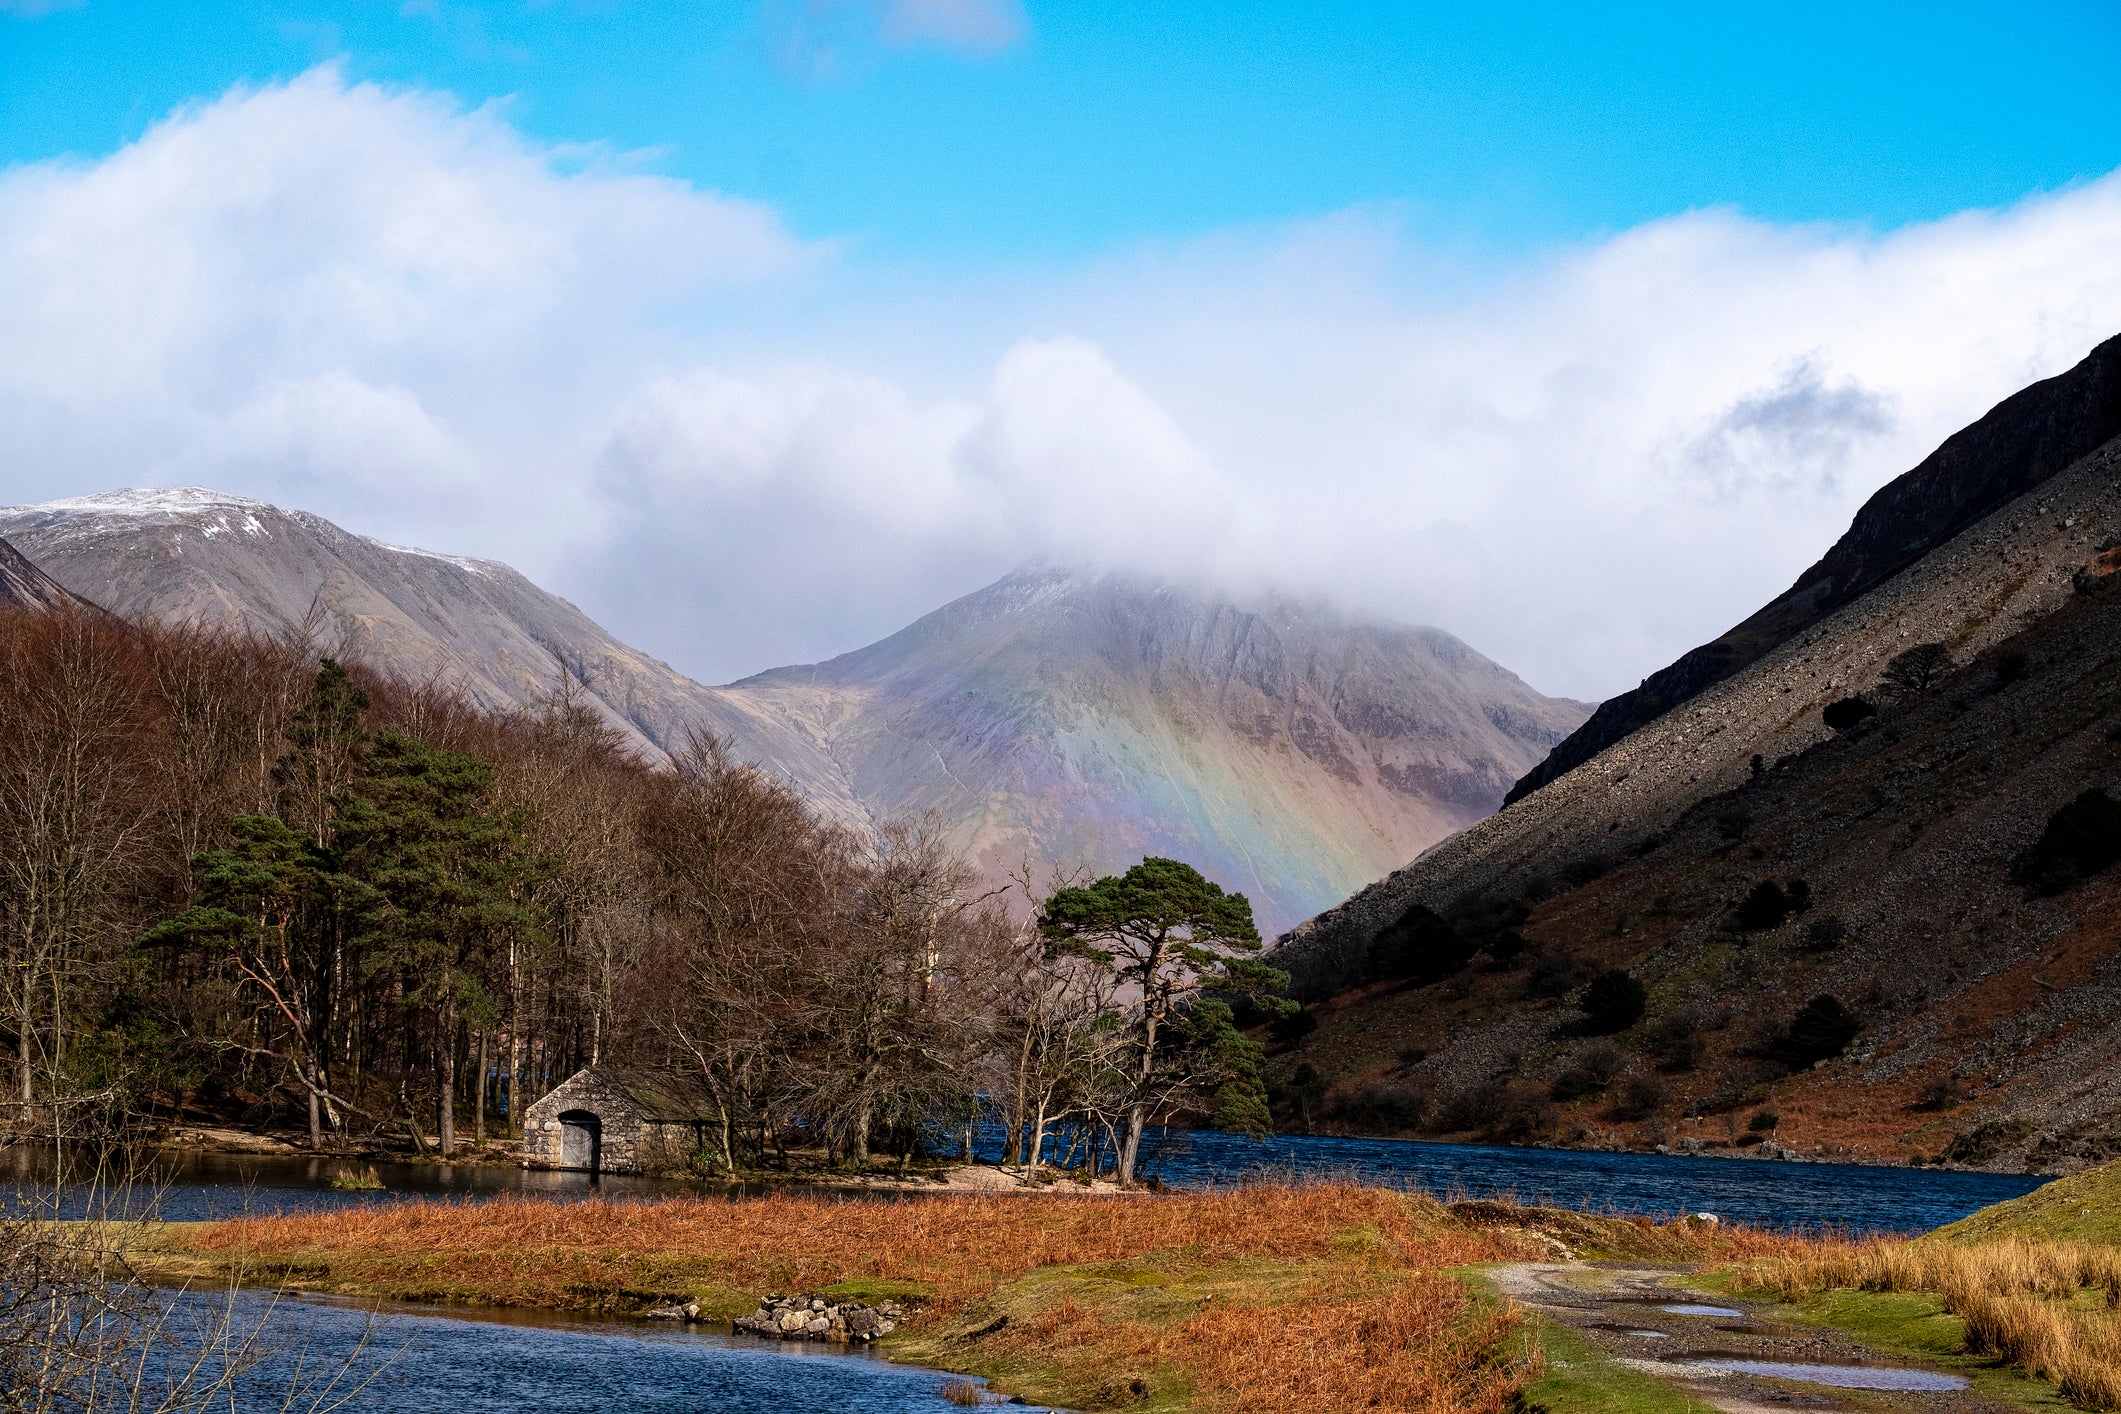 For an alternative to Scafell Pike, try Great Gable